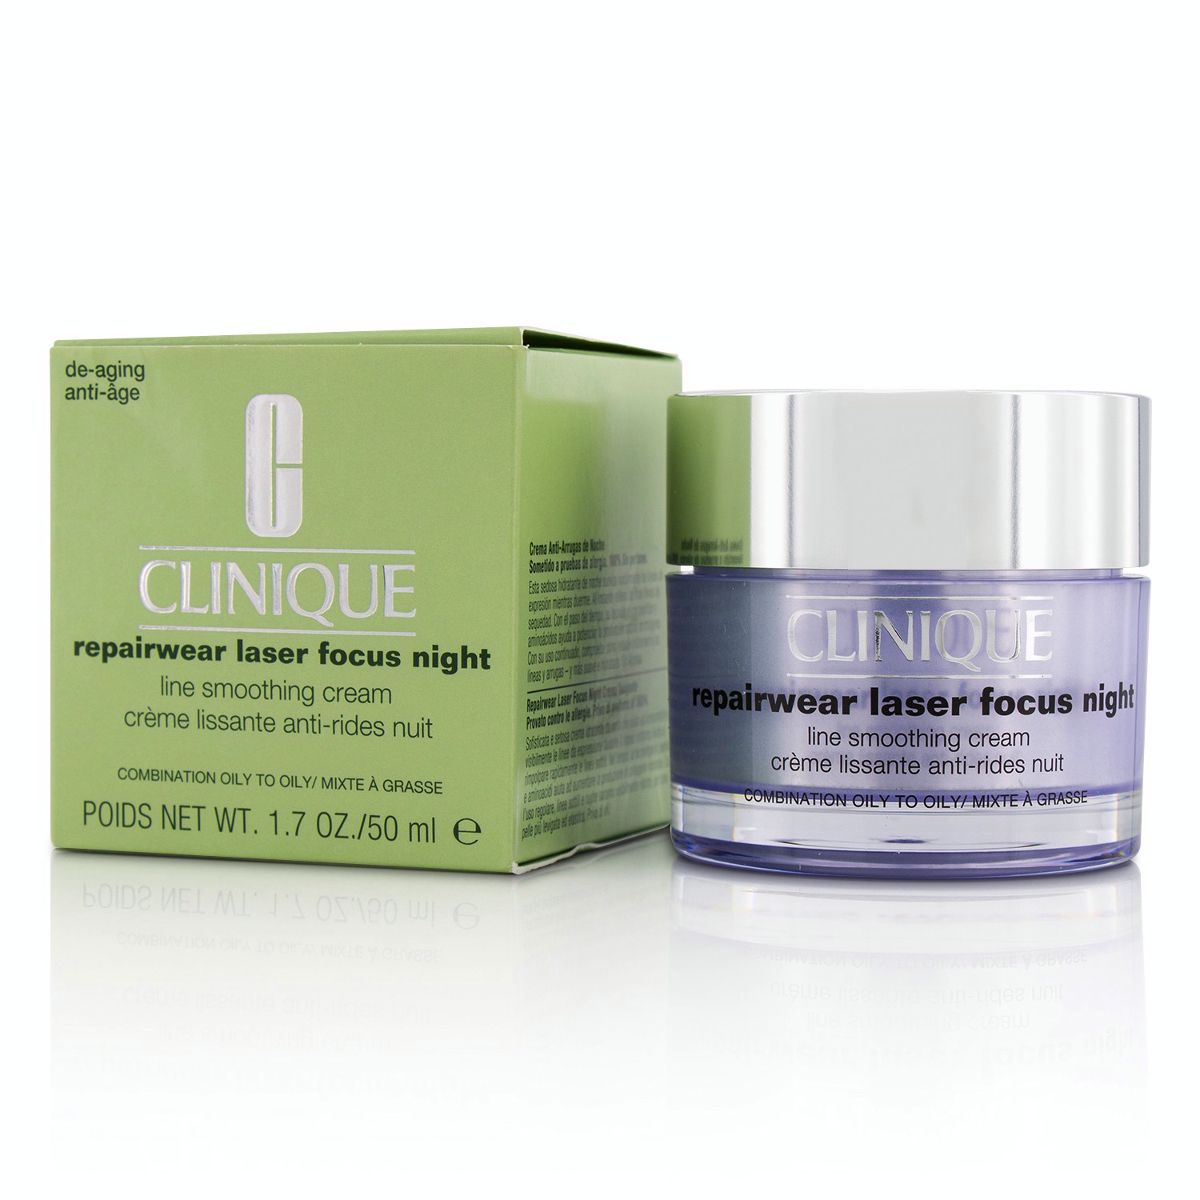 Repairwear Laser Focus Night Line Smoothing Cream - Combination Oily To Oily Clinique Image